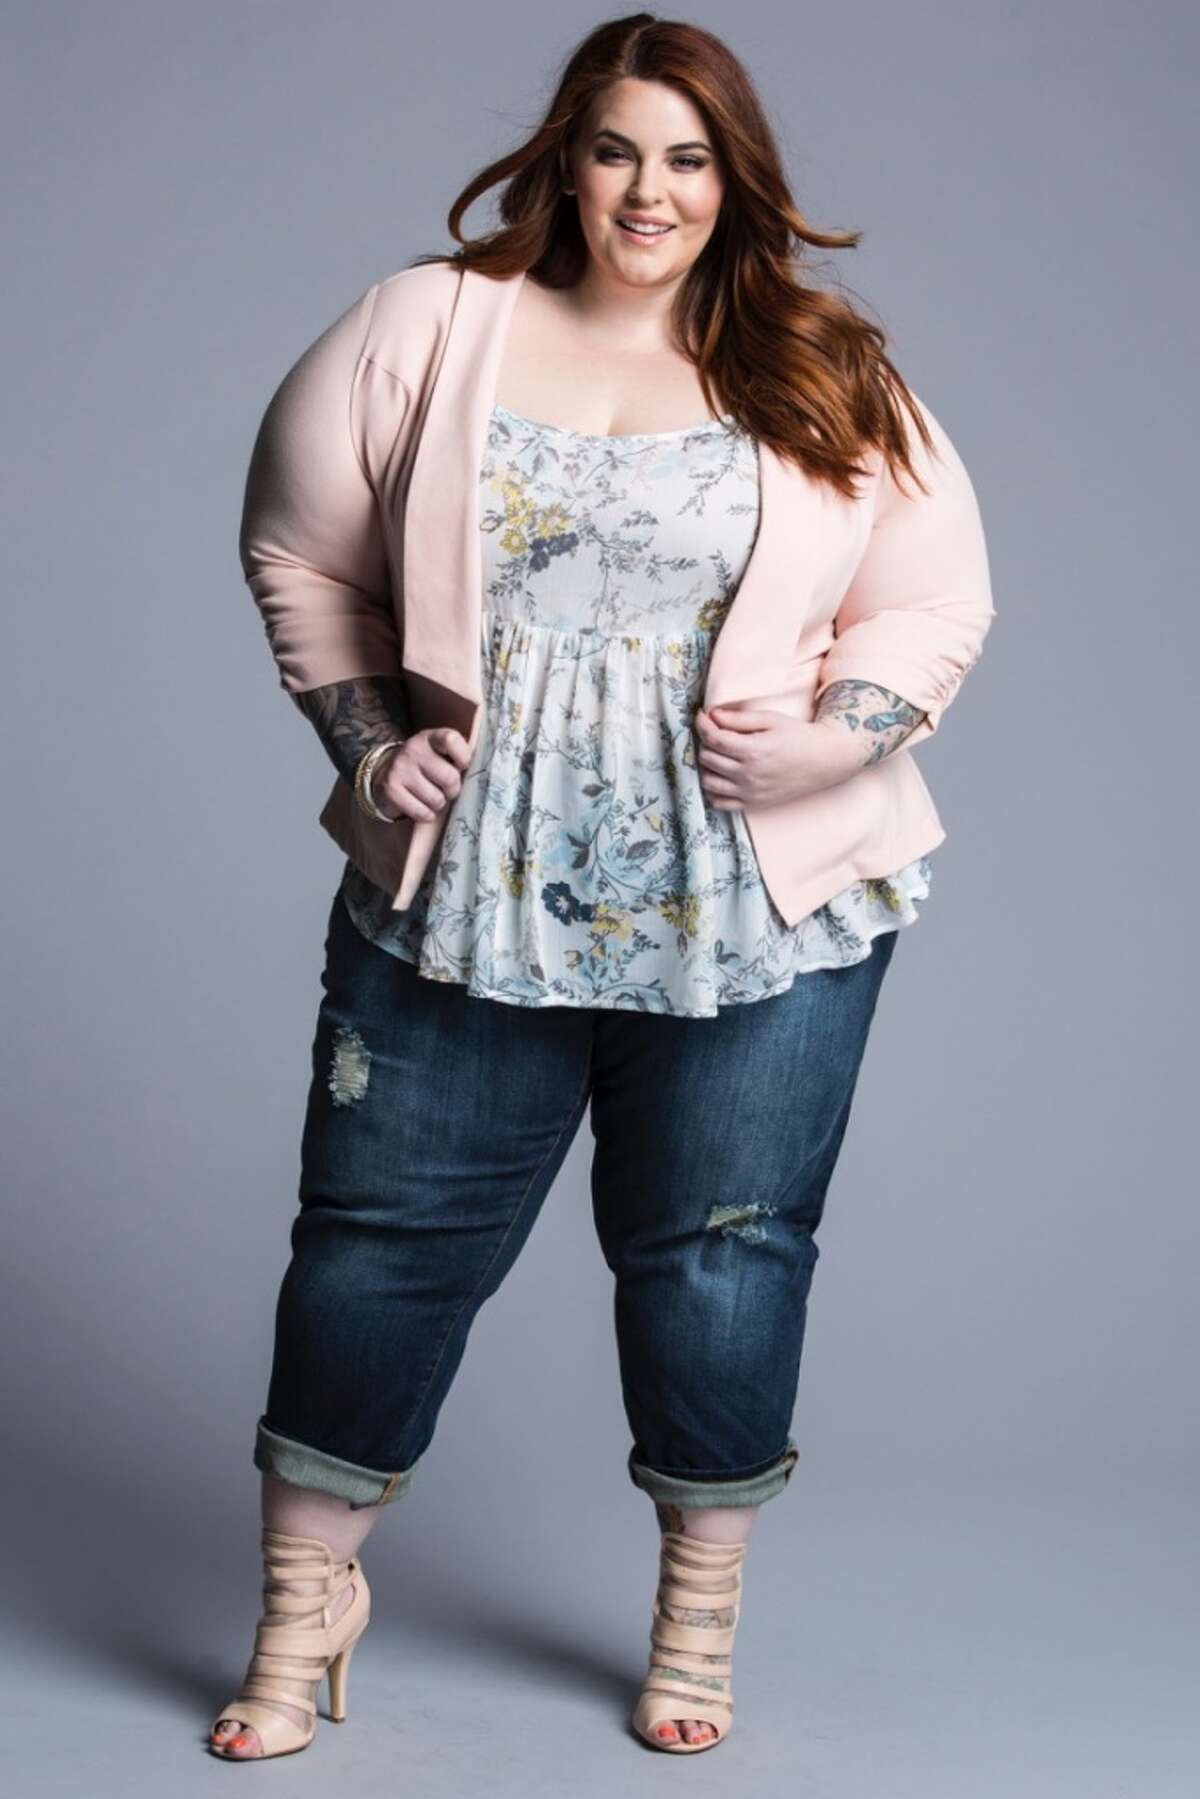 Tess Holliday is the face of Torrids spring 2015 line